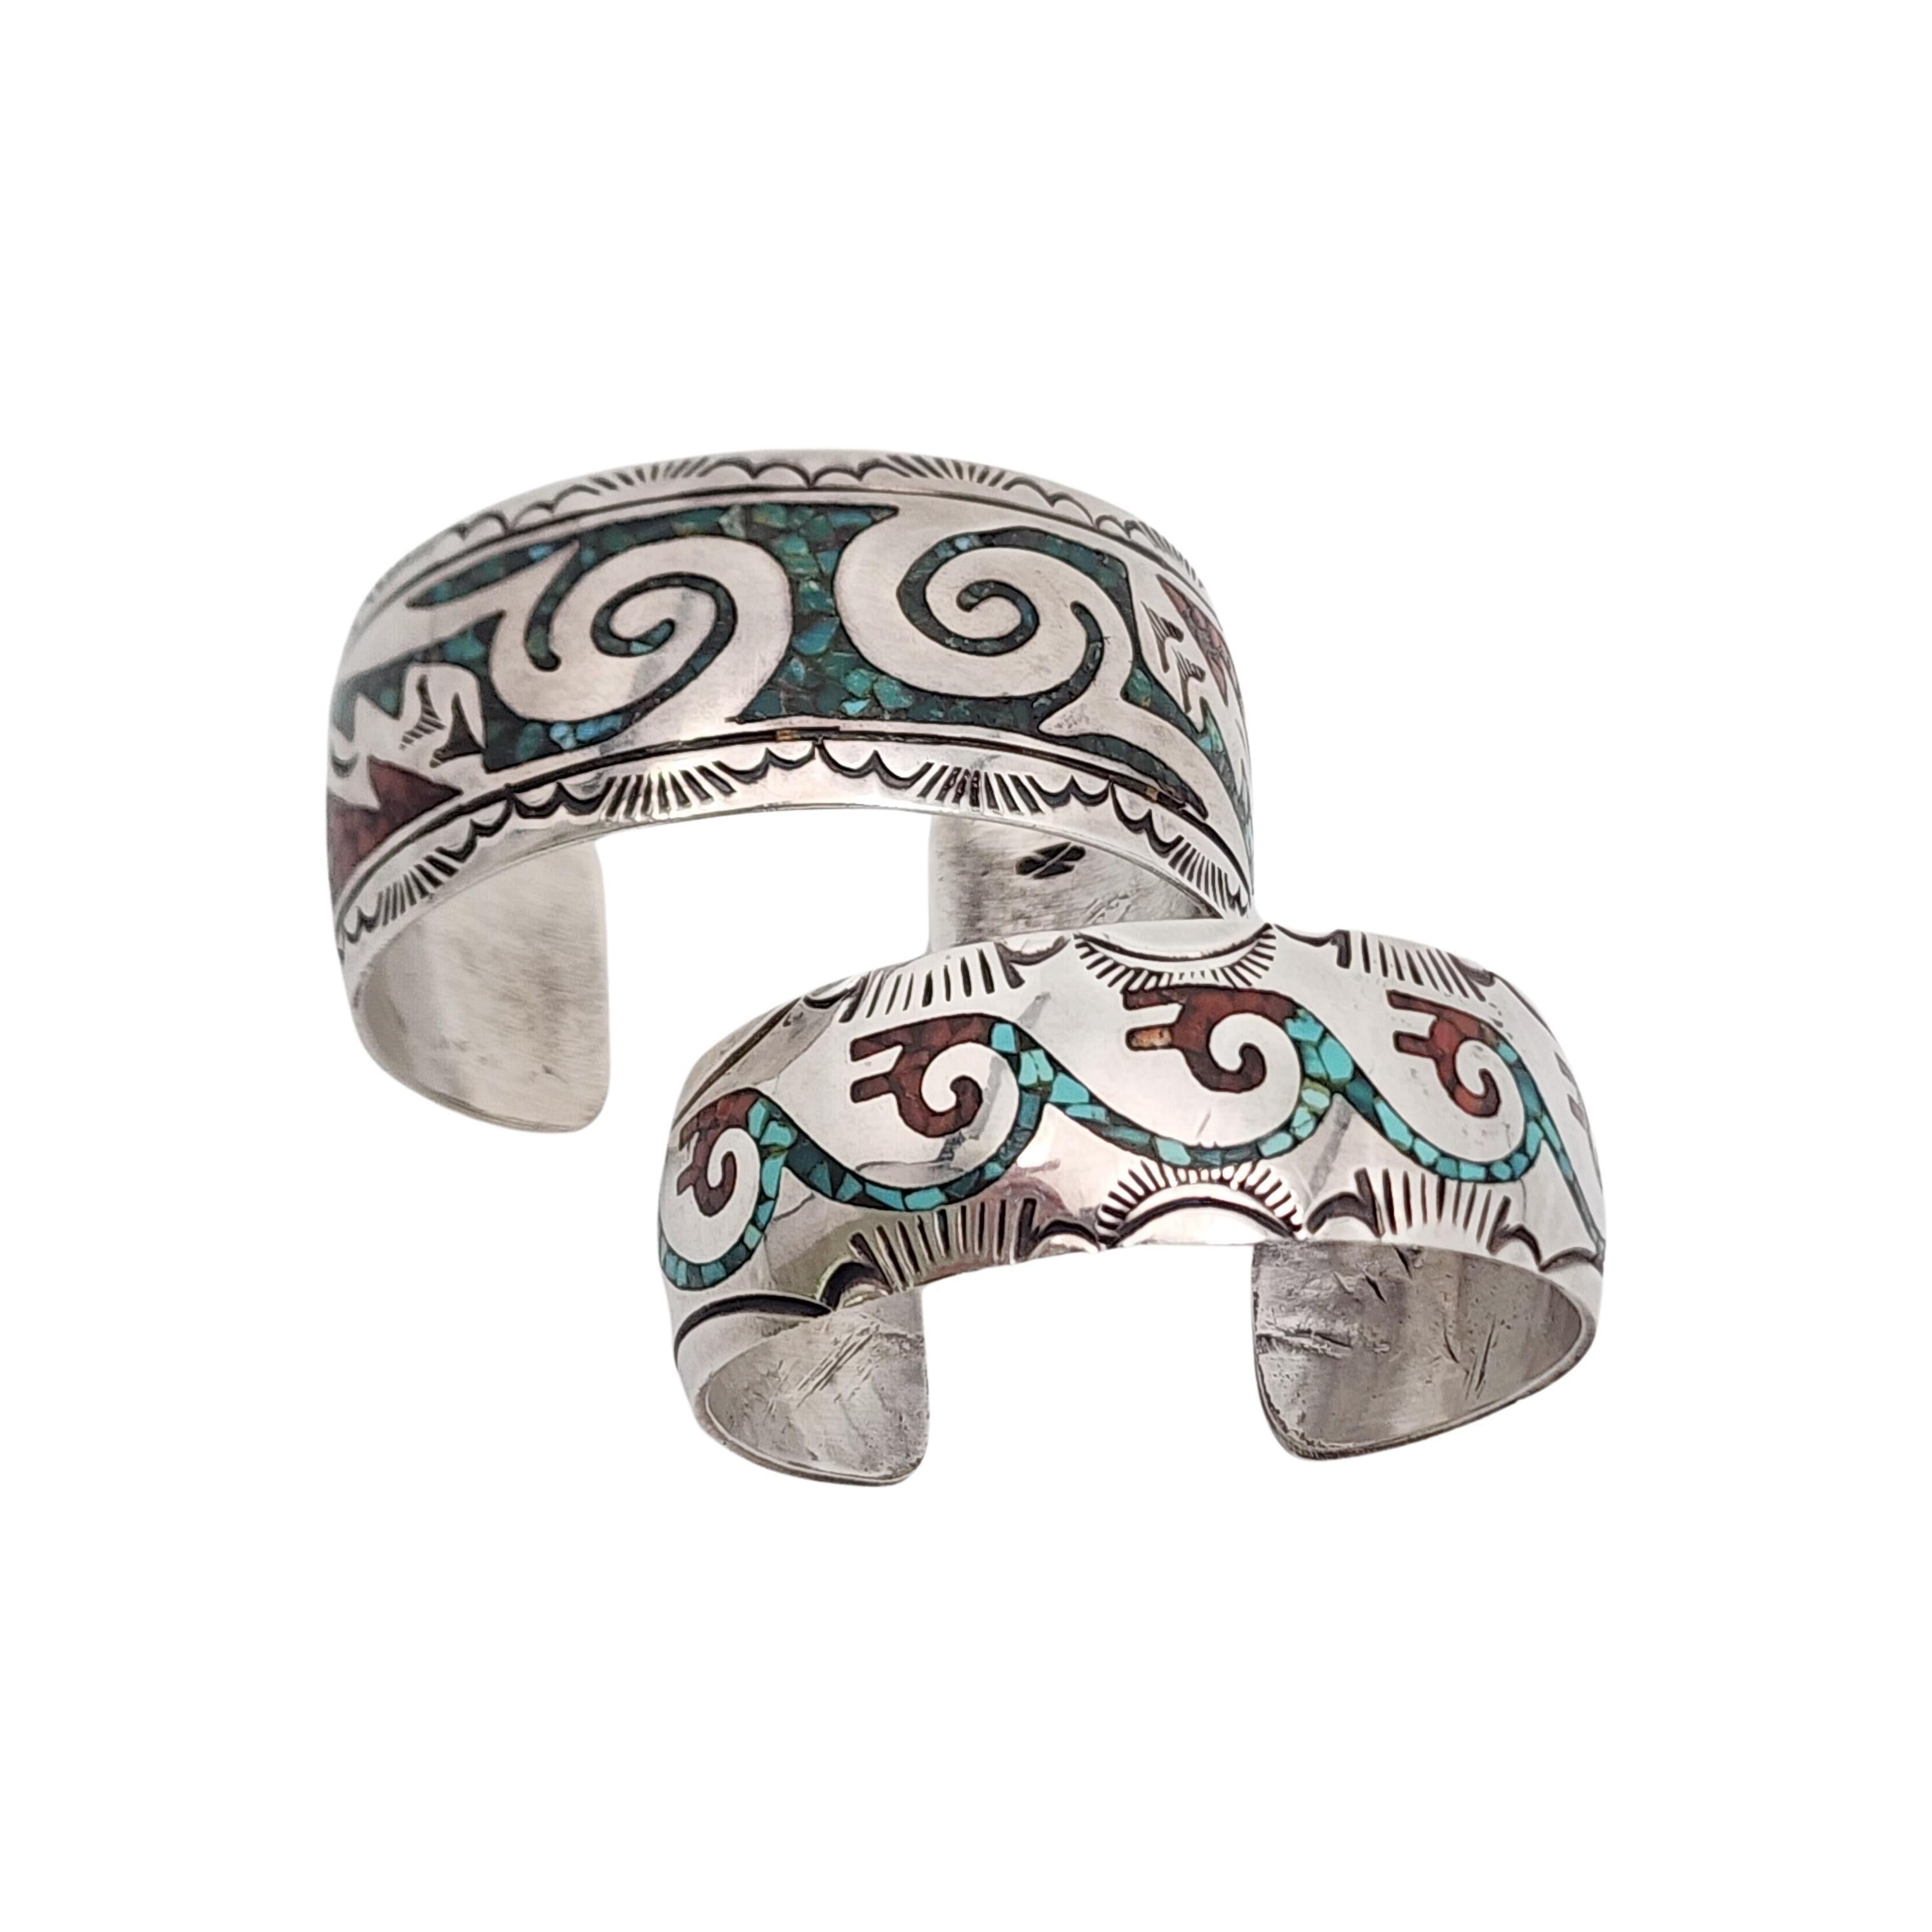 Women's Set of 2 Native American Crushed Turquoise Silver Cuff Bracelets #15358